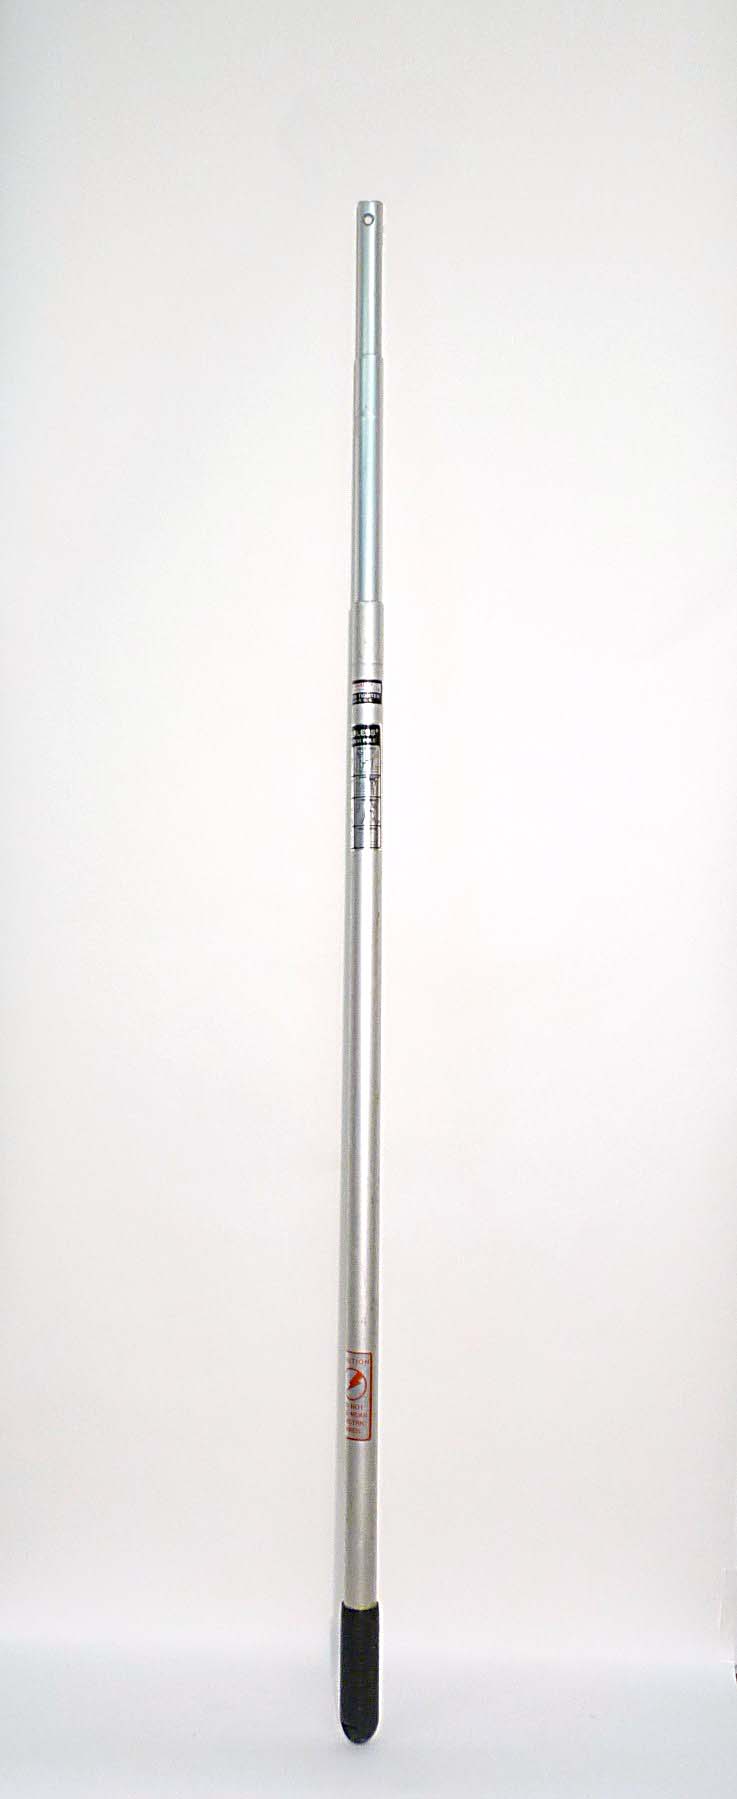 4 SECTION TELESCOPIC 18FT. POLE